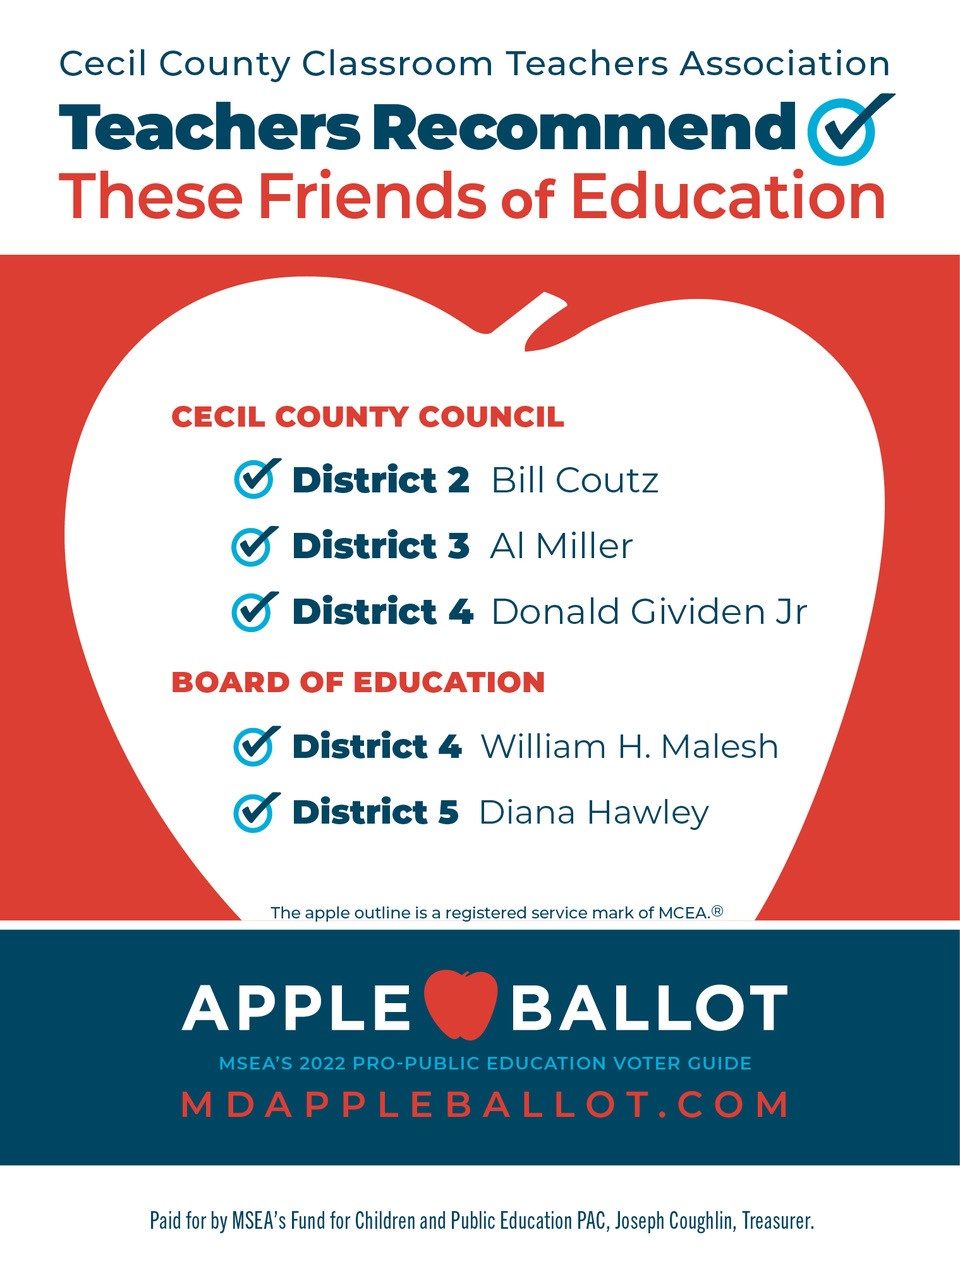 CCCTA Apple Ballot
Support Education Friendly Candidates!